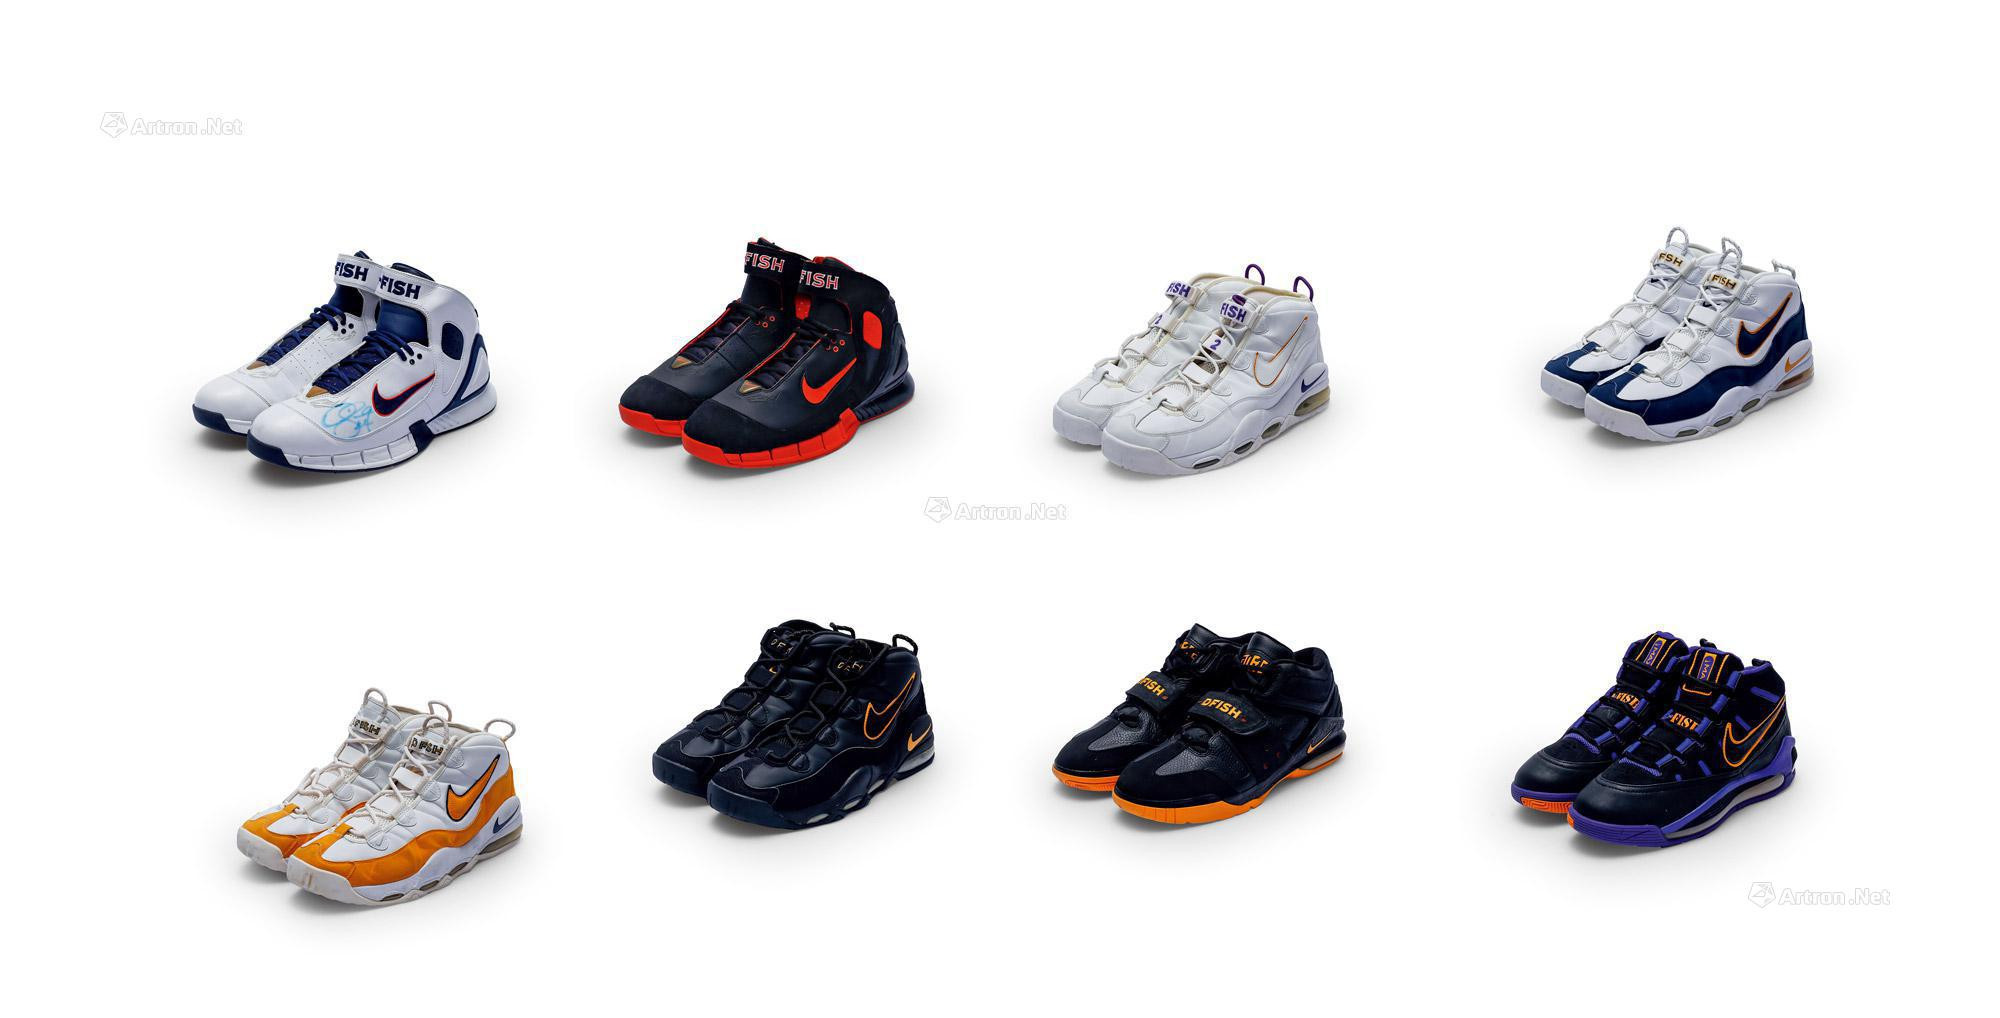 Derek Fisher Exclusive Sneaker Collection  8 Pairs of Player Exclusive Sneakers